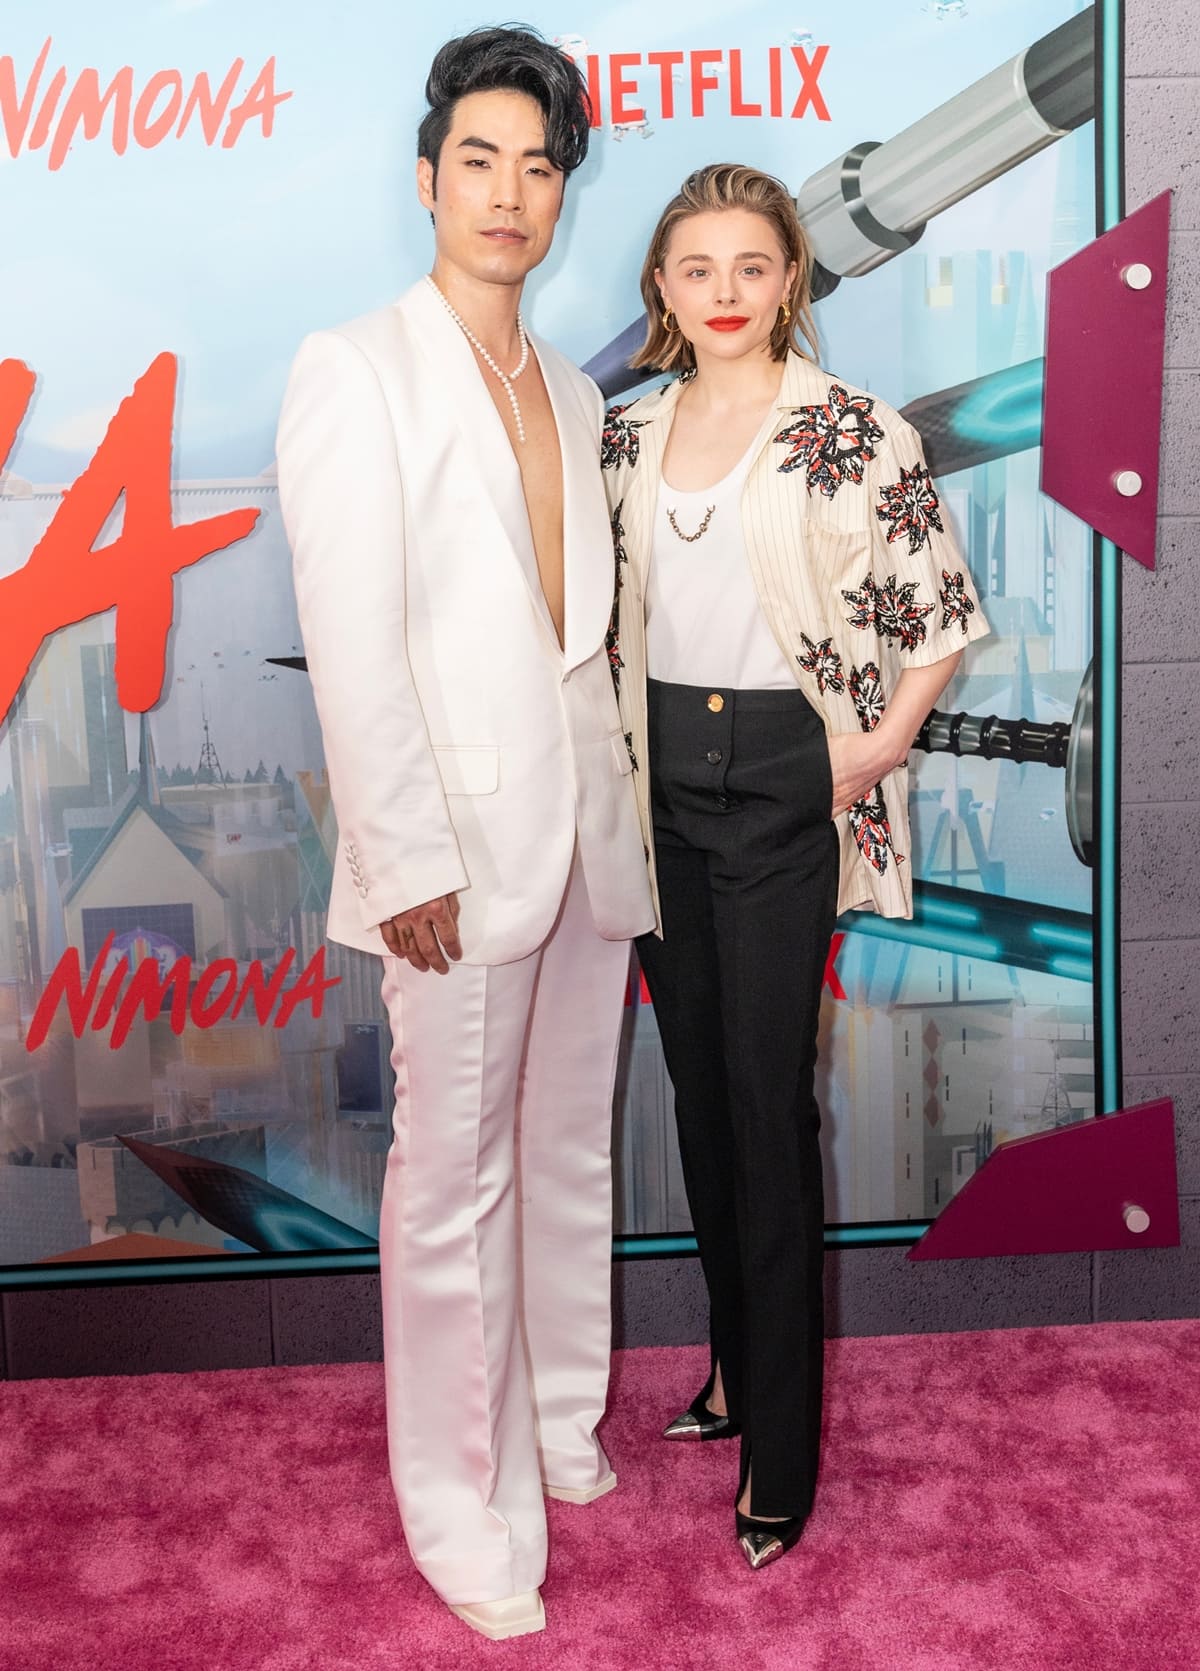 Eugene Lee Yang stands at 6 feet (1.83 meters) in height, which is notably taller than Chloë Moretz, who is 5 feet 4 inches (162.6 centimeters) in height